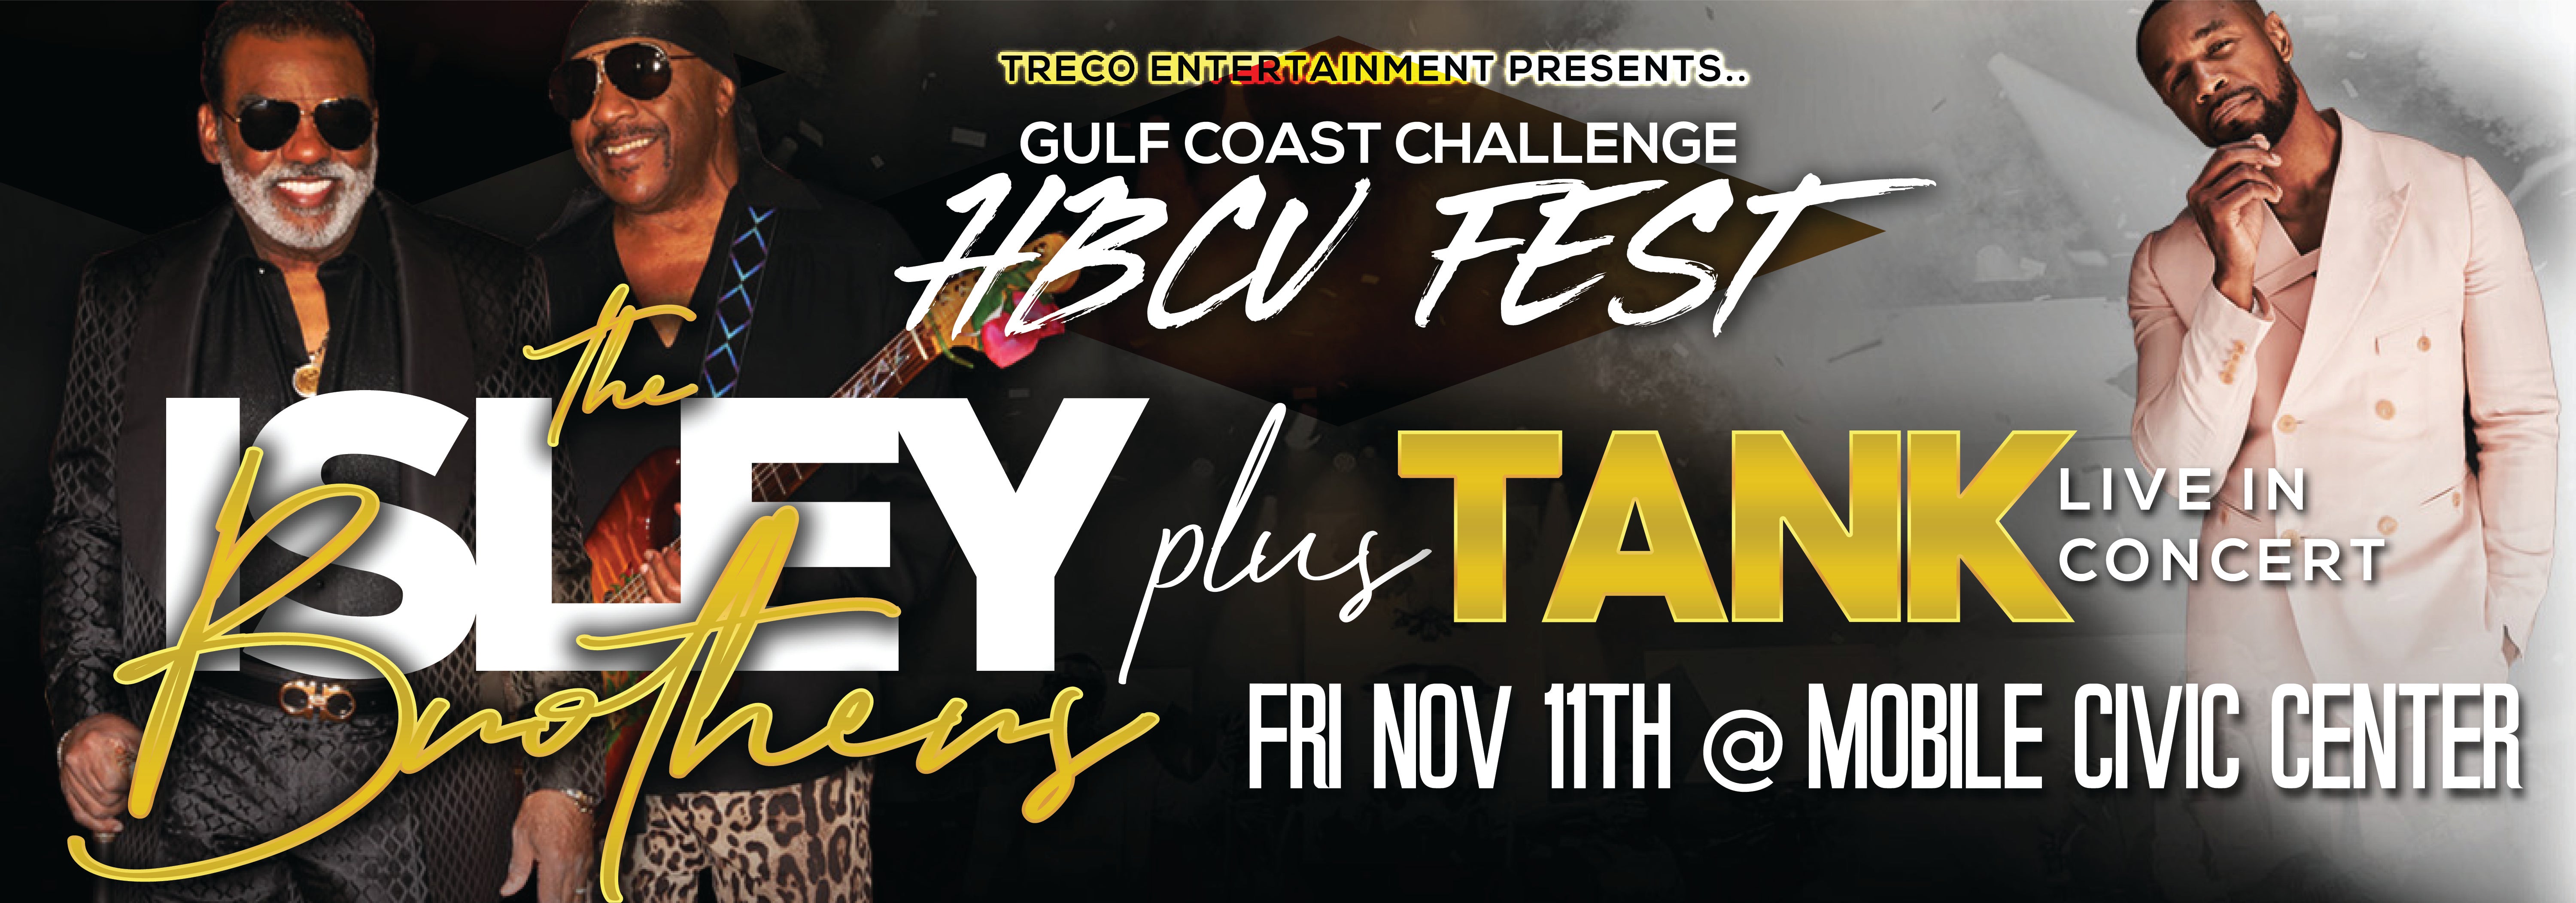 GCC HBCU Fest with The Isley Brothers & Tank